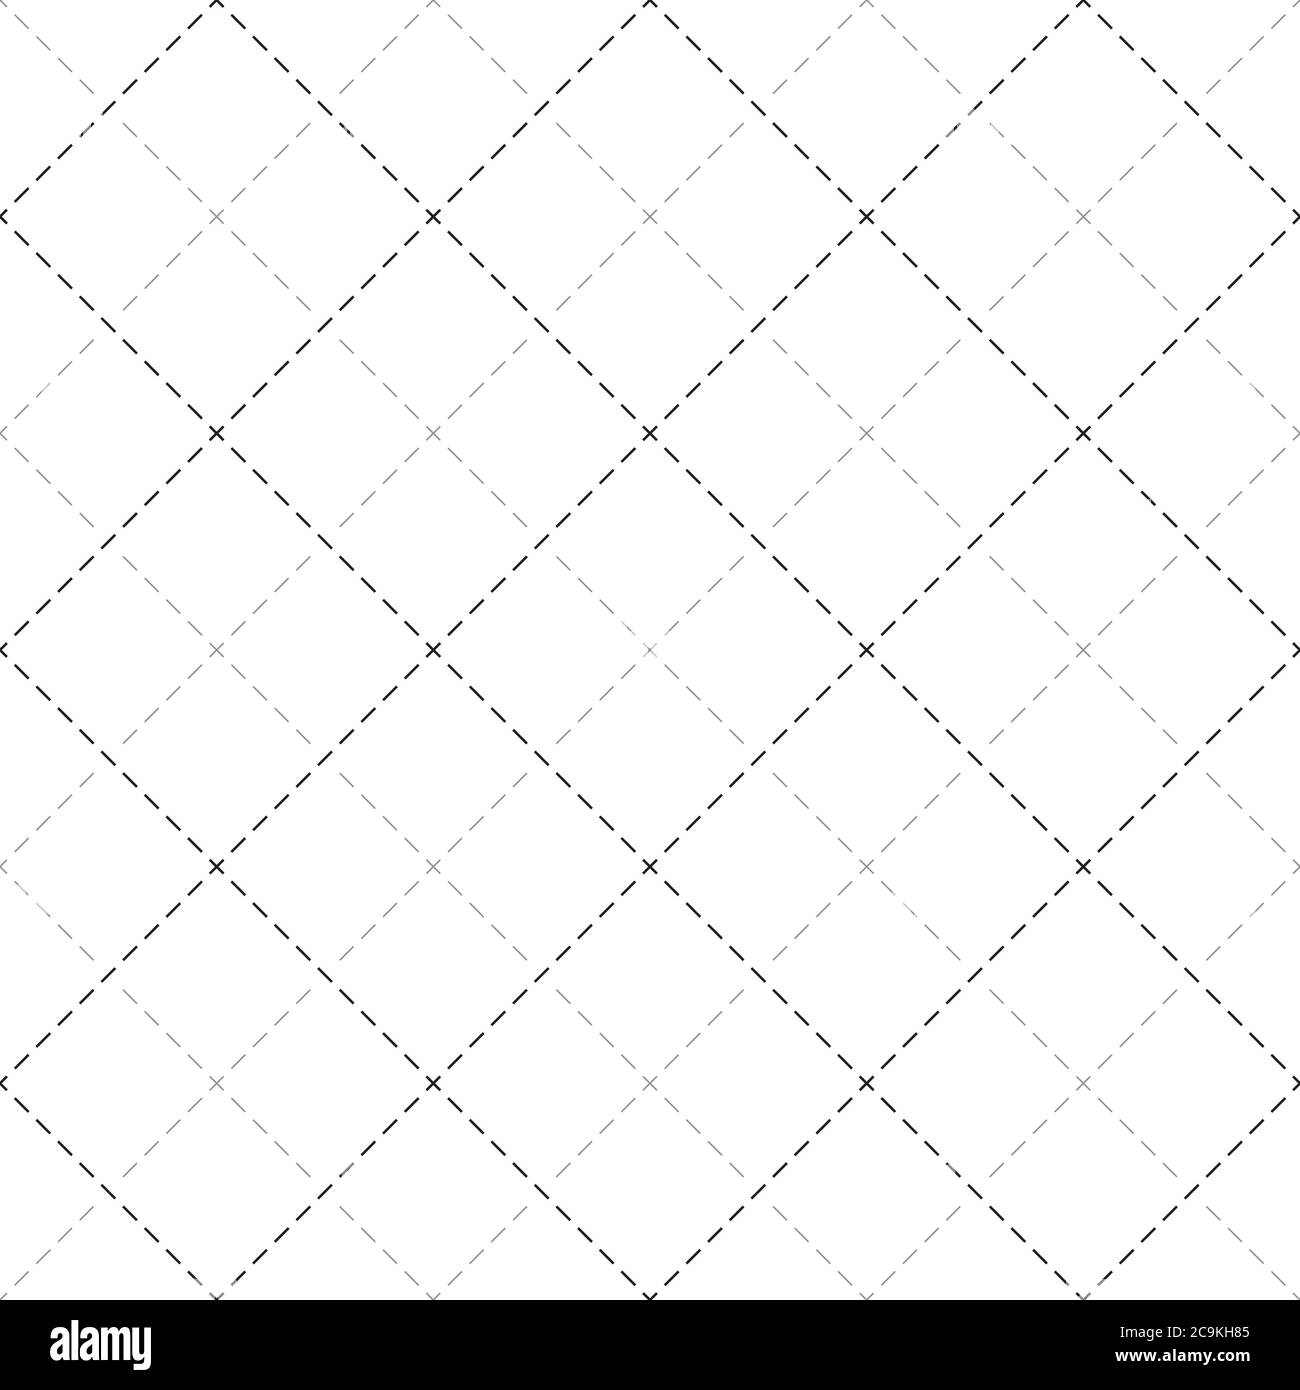 Dotted line seamless pattern. Geometric striped vector illustration. Repeating geometric shapes, cross, diagonal dotted line. Seamless fabric texture. Stock Vector